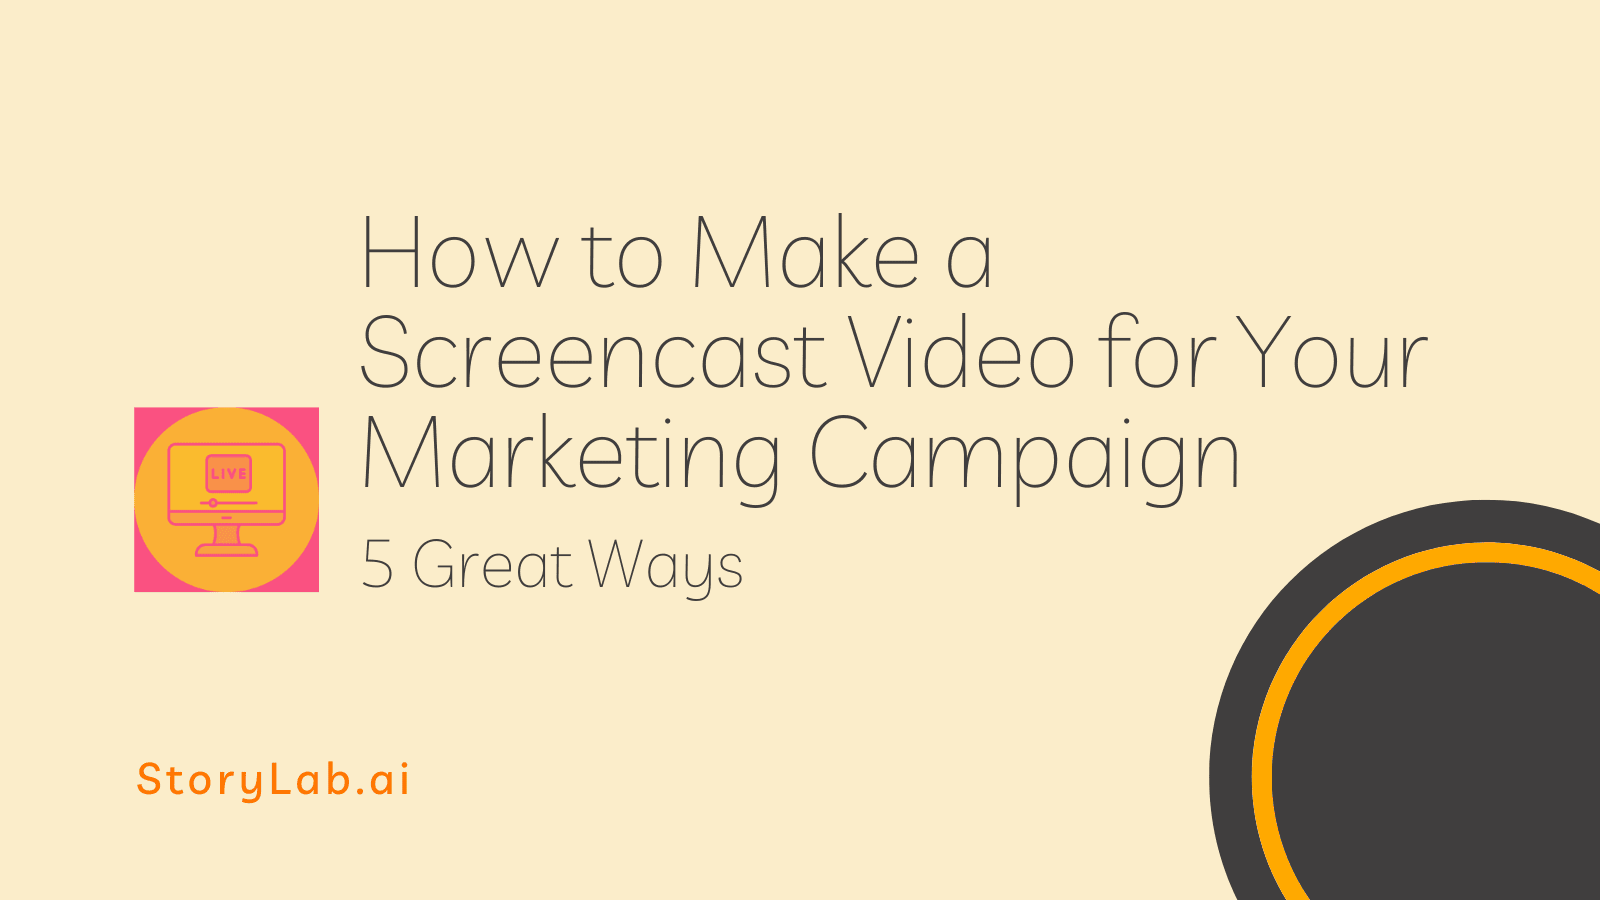 How to Make a Screencast Video for Your Marketing Campaign 5 Great Ways